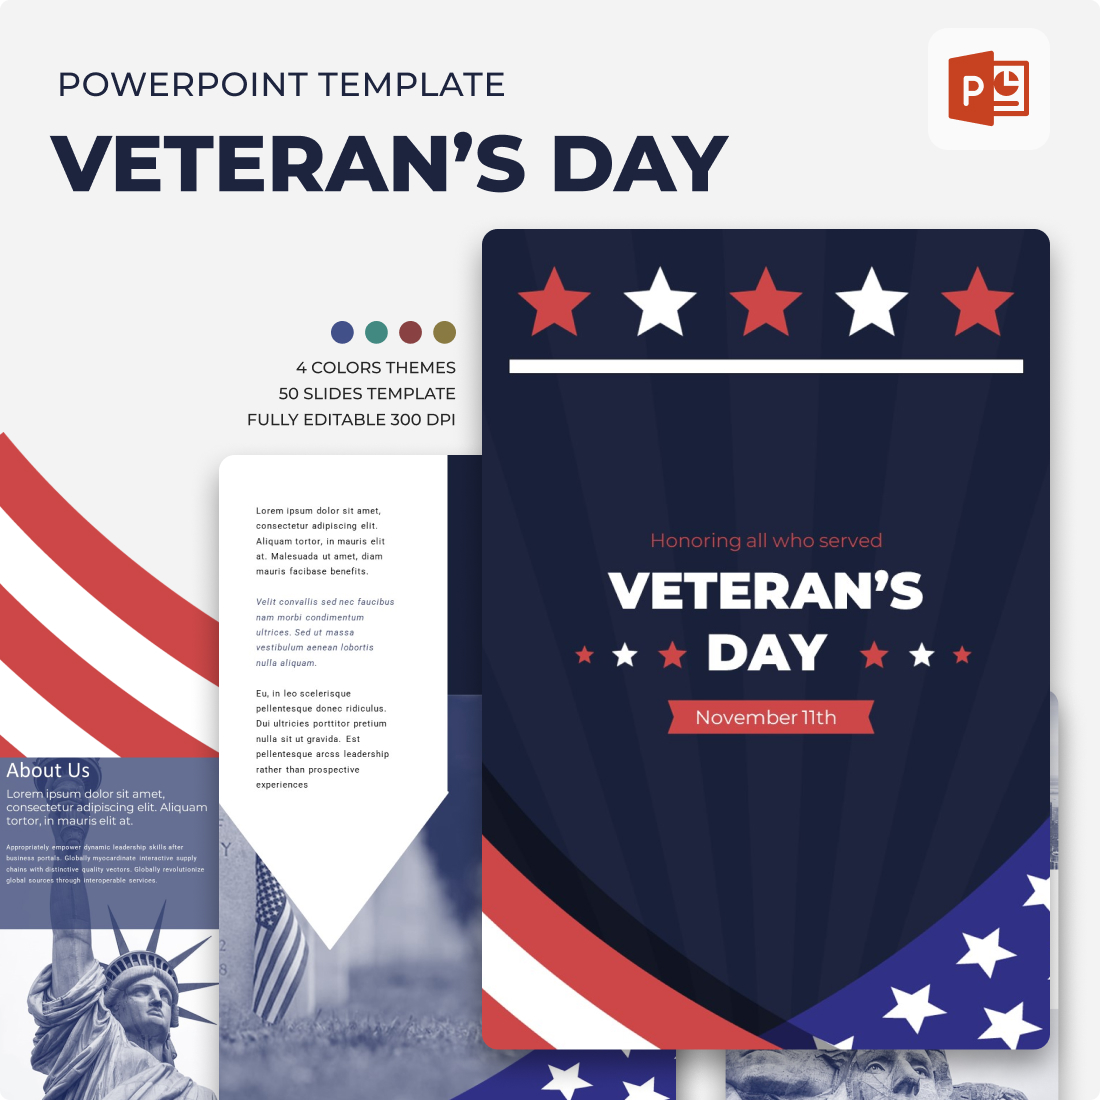 Preview veteransday powerpoint template.